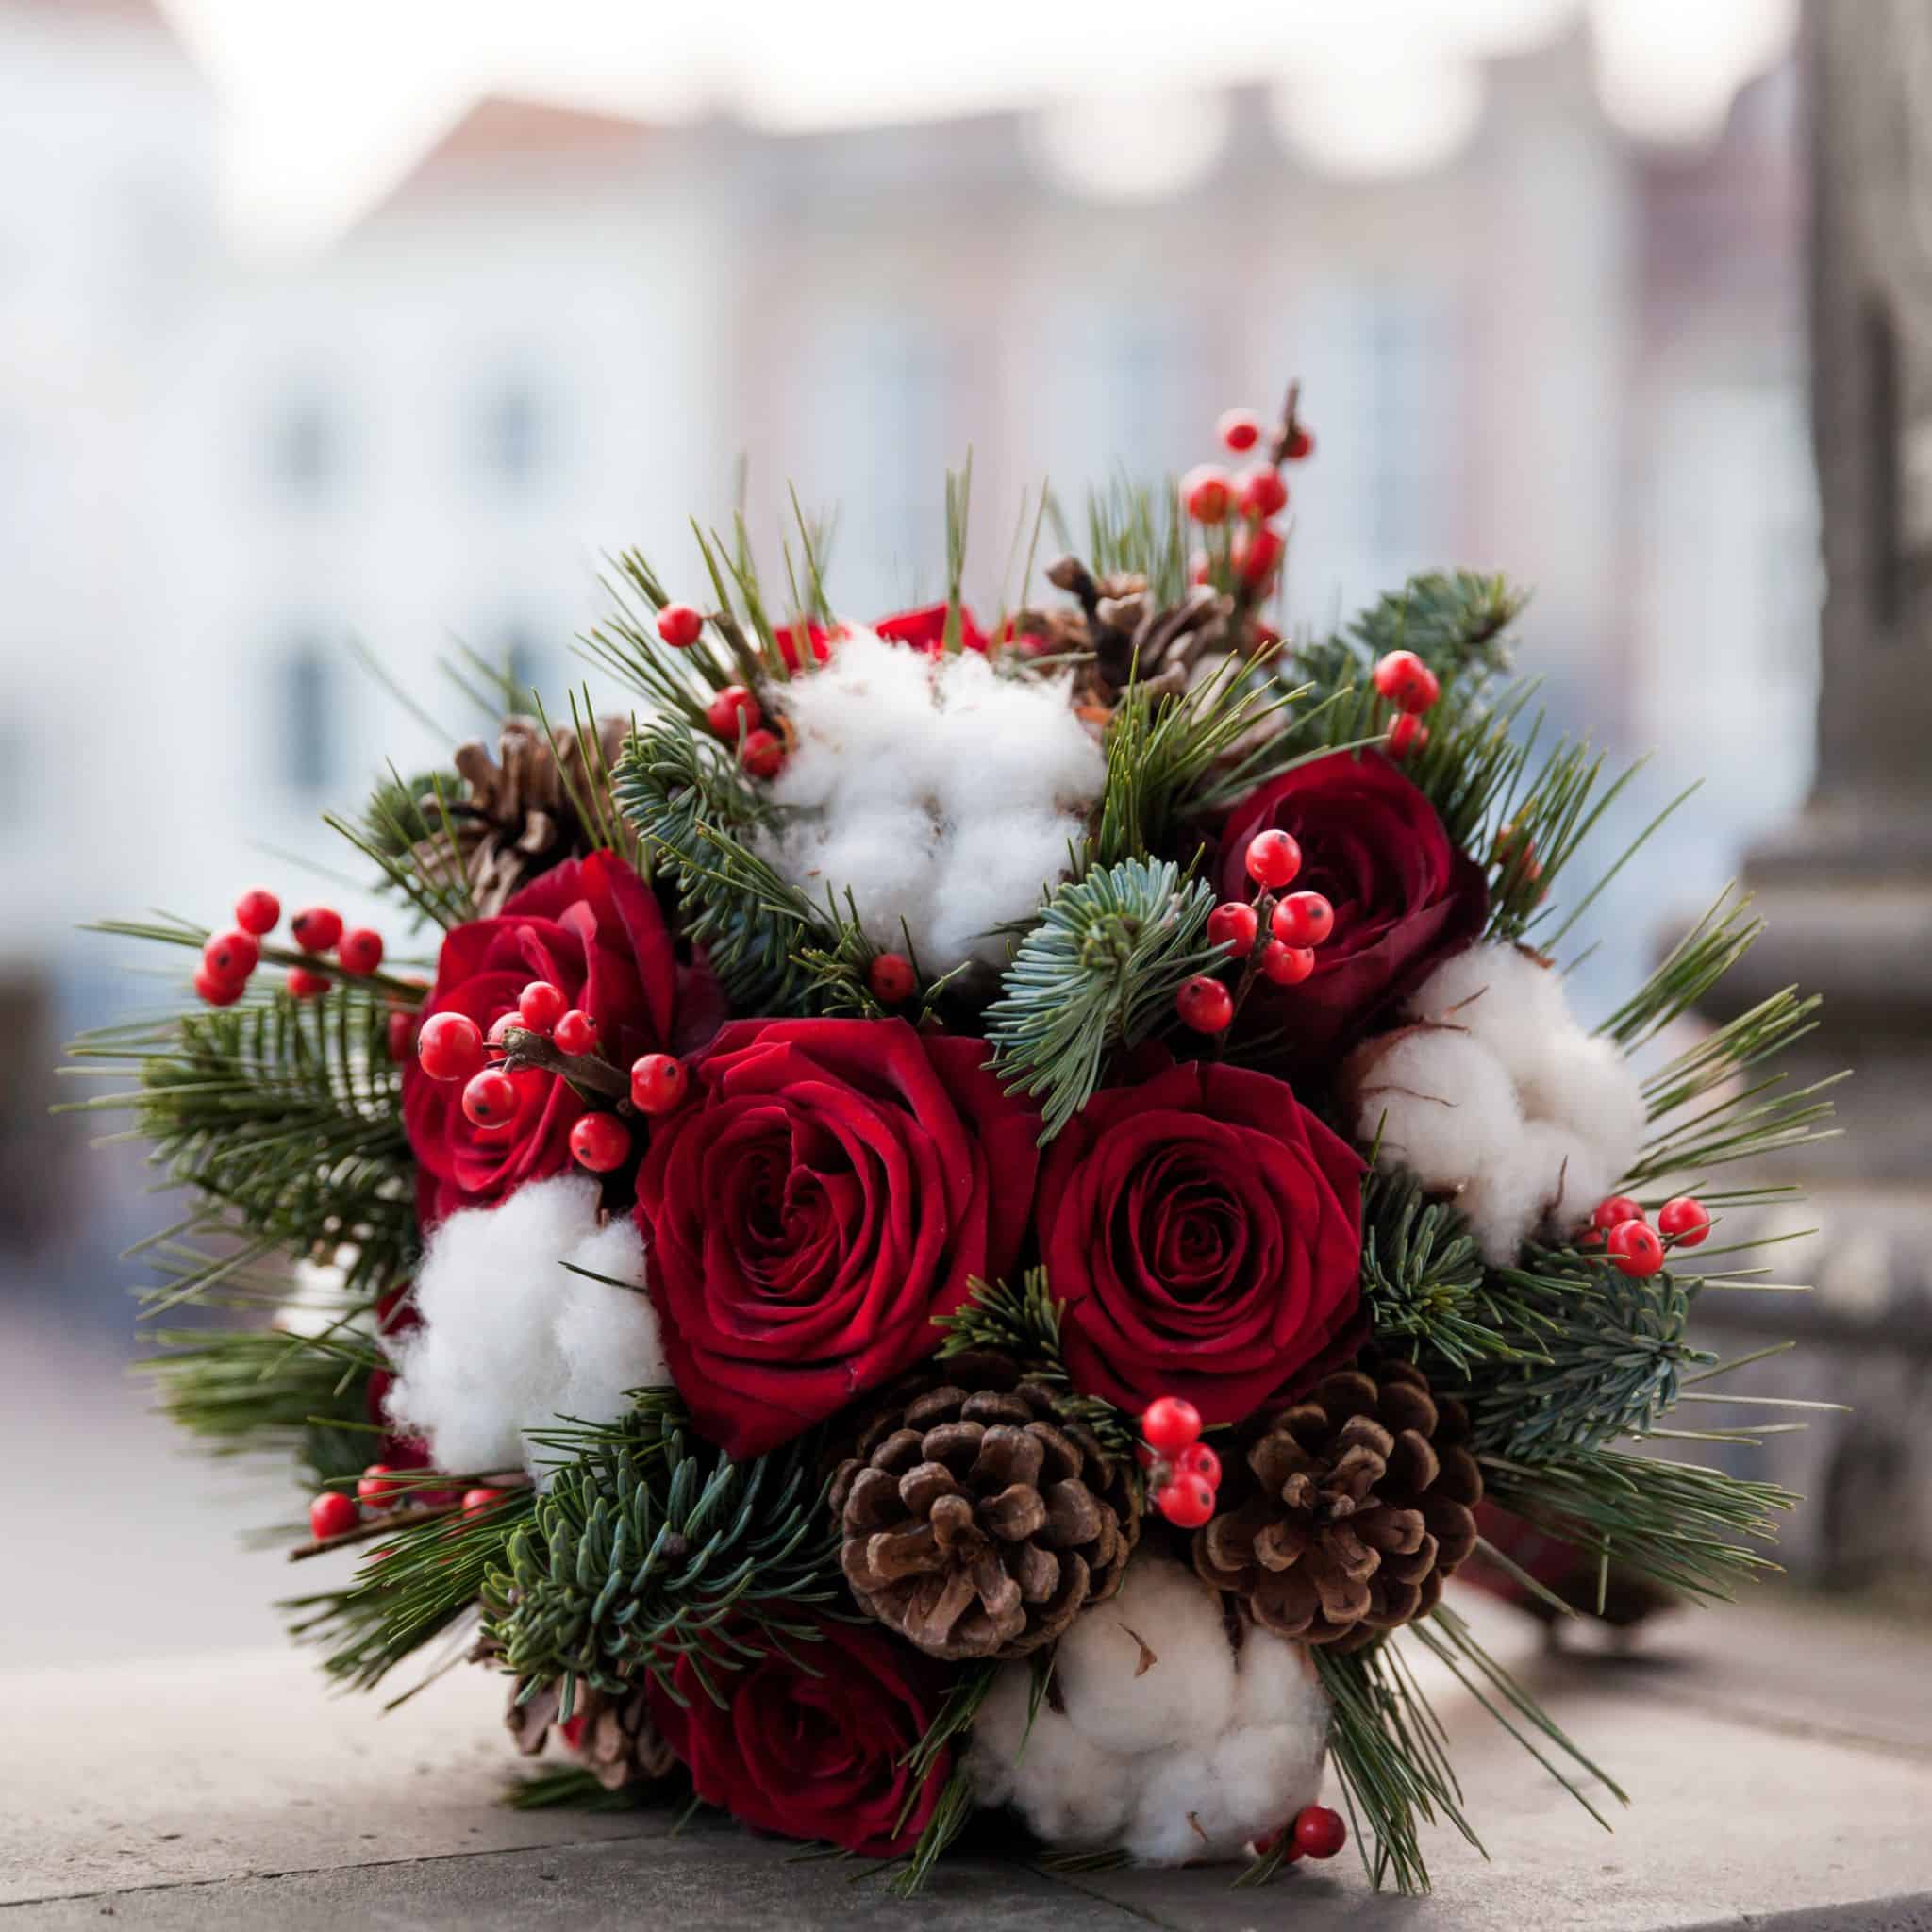 https://www.cascadefloralwholesale.com/wp-content/uploads/2021/11/Holiday-bouquet-with-pine-cones-red-roses-white-cotton-flowers-berries-and-green-pine-accents.jpg